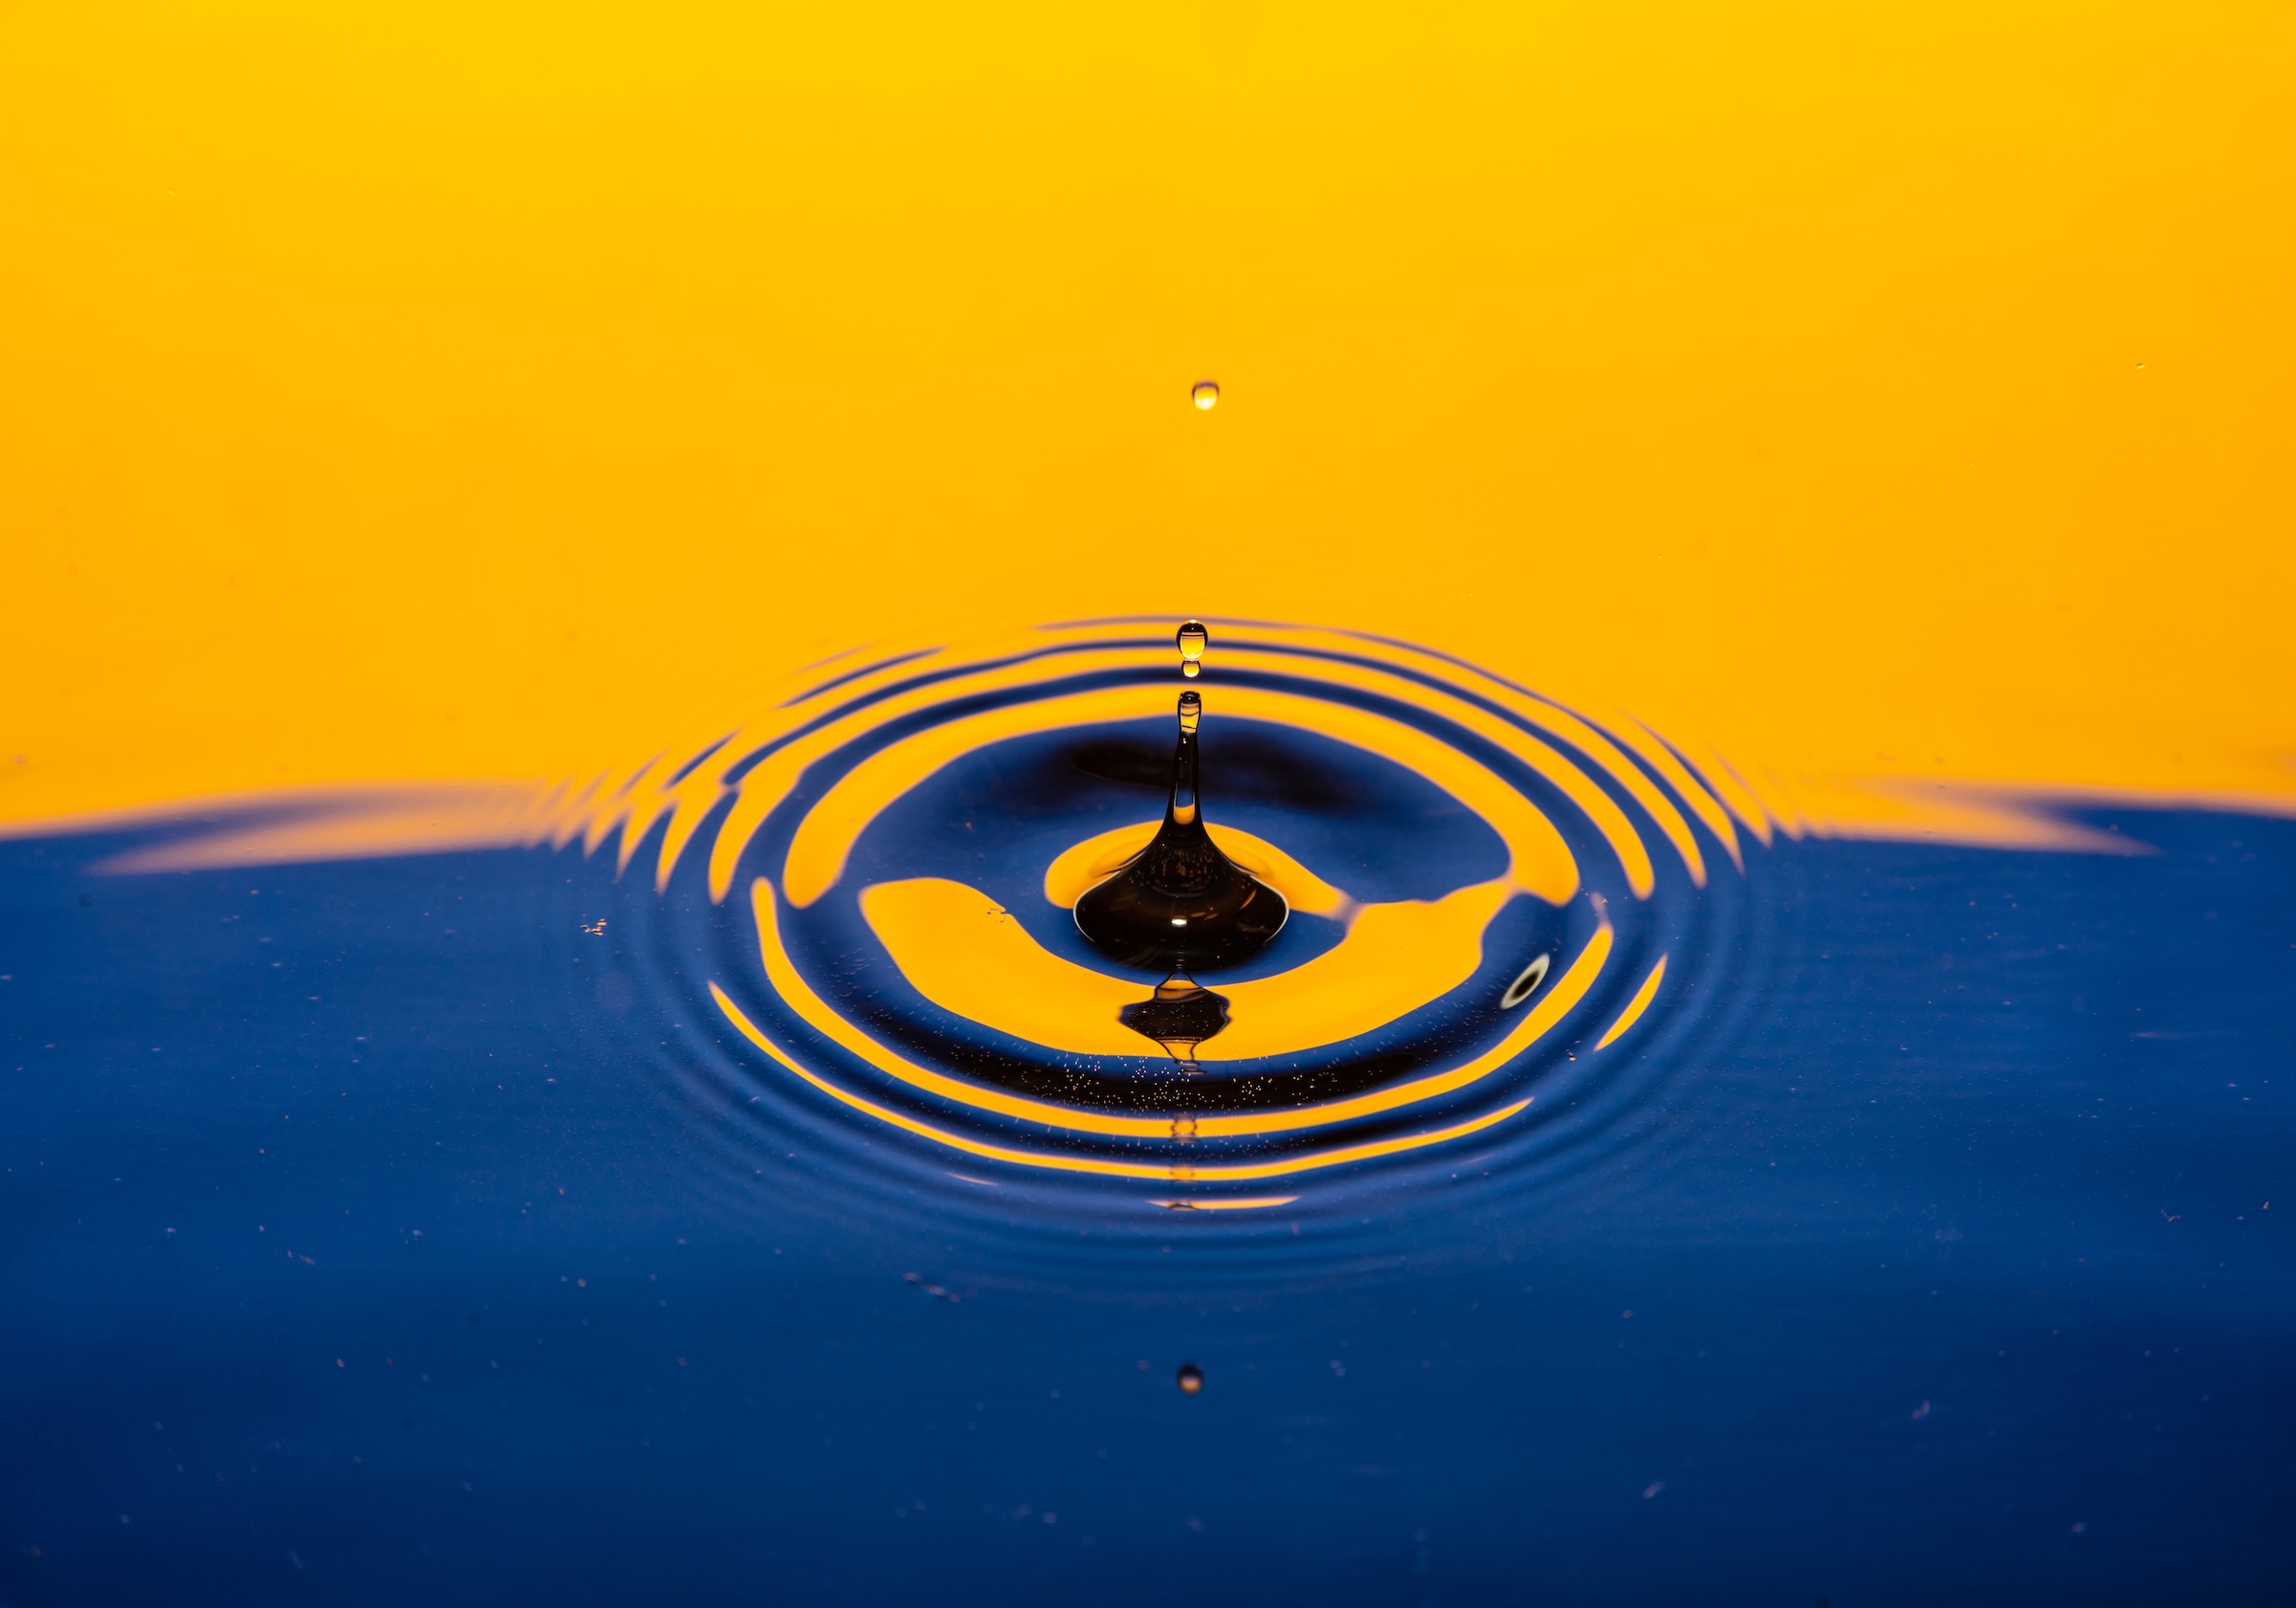 The ripple effect in water